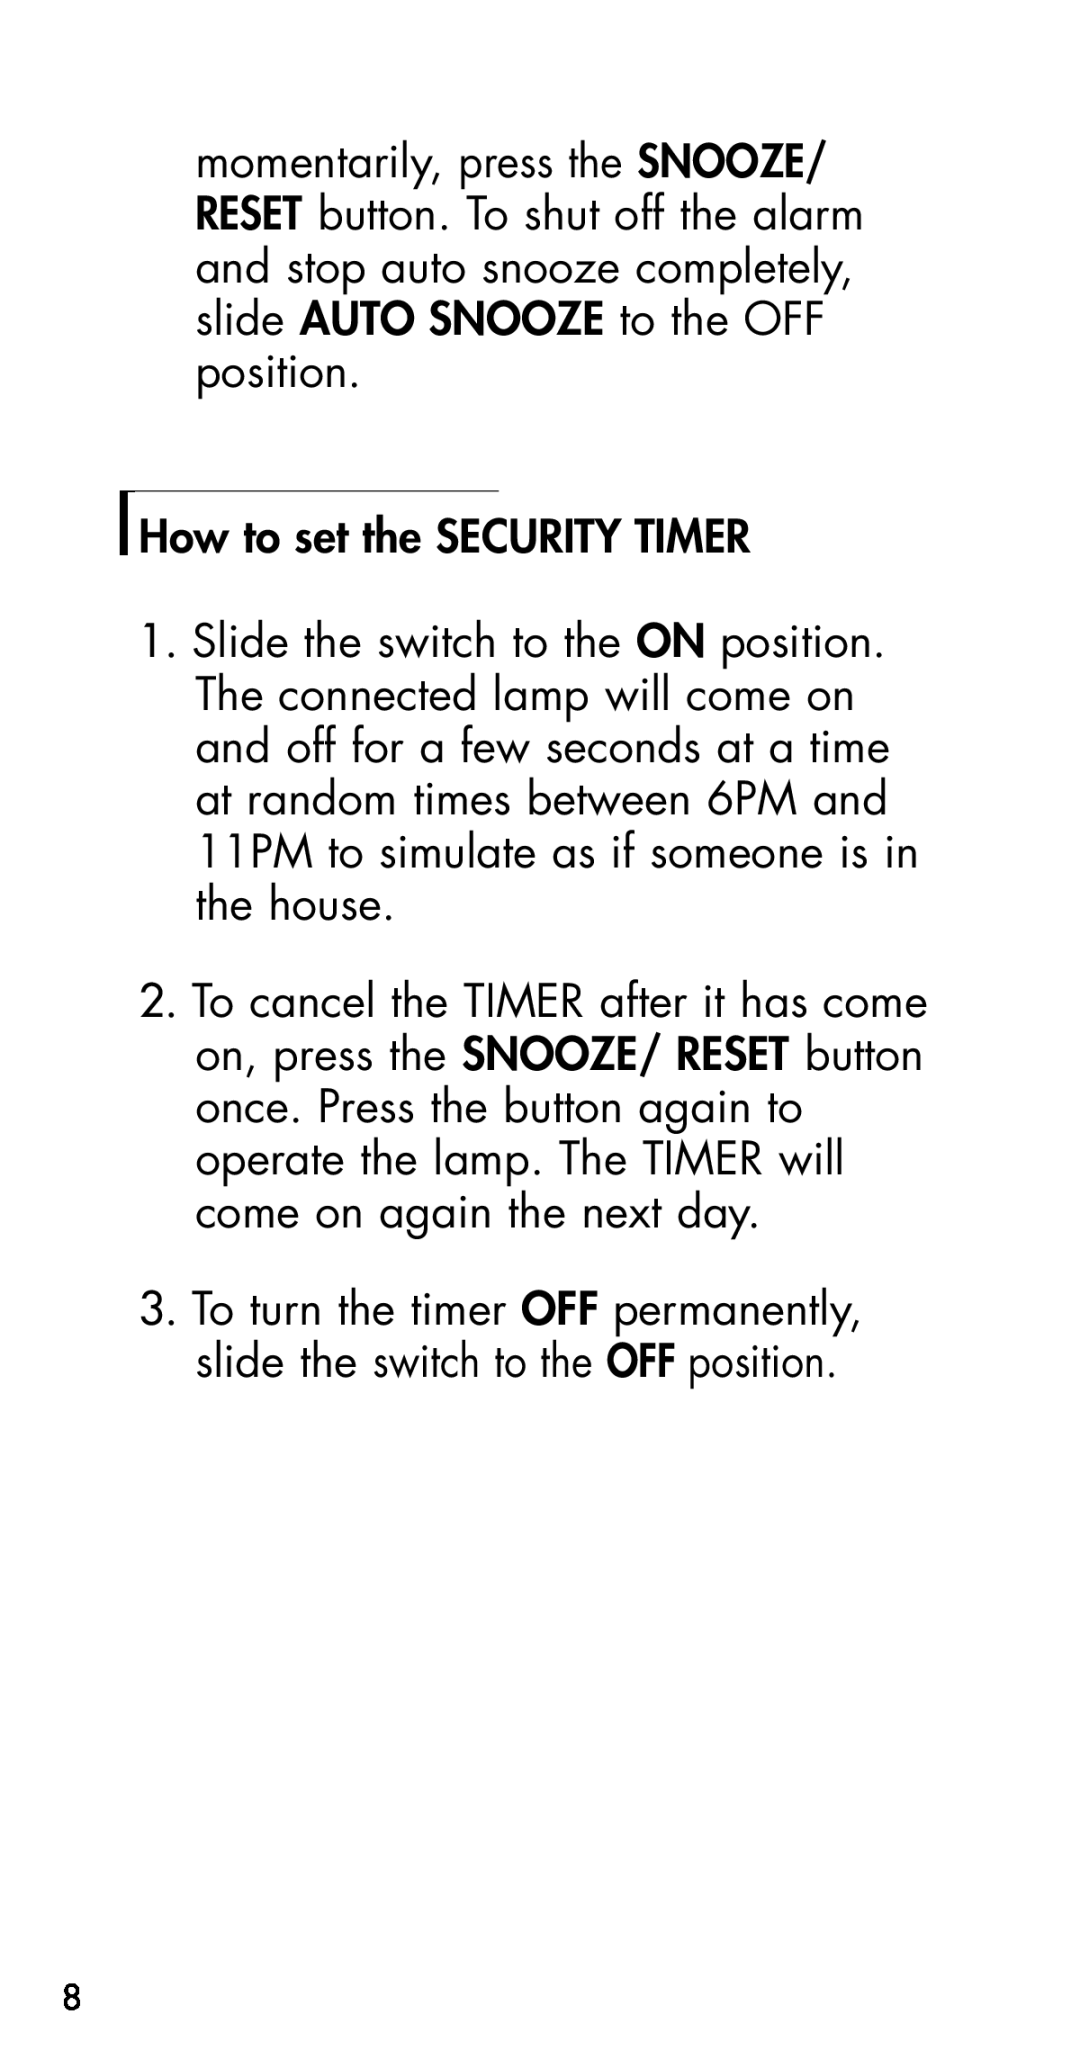 Plantronics Fire Alarm manual How to set the SECURITY TIMER 